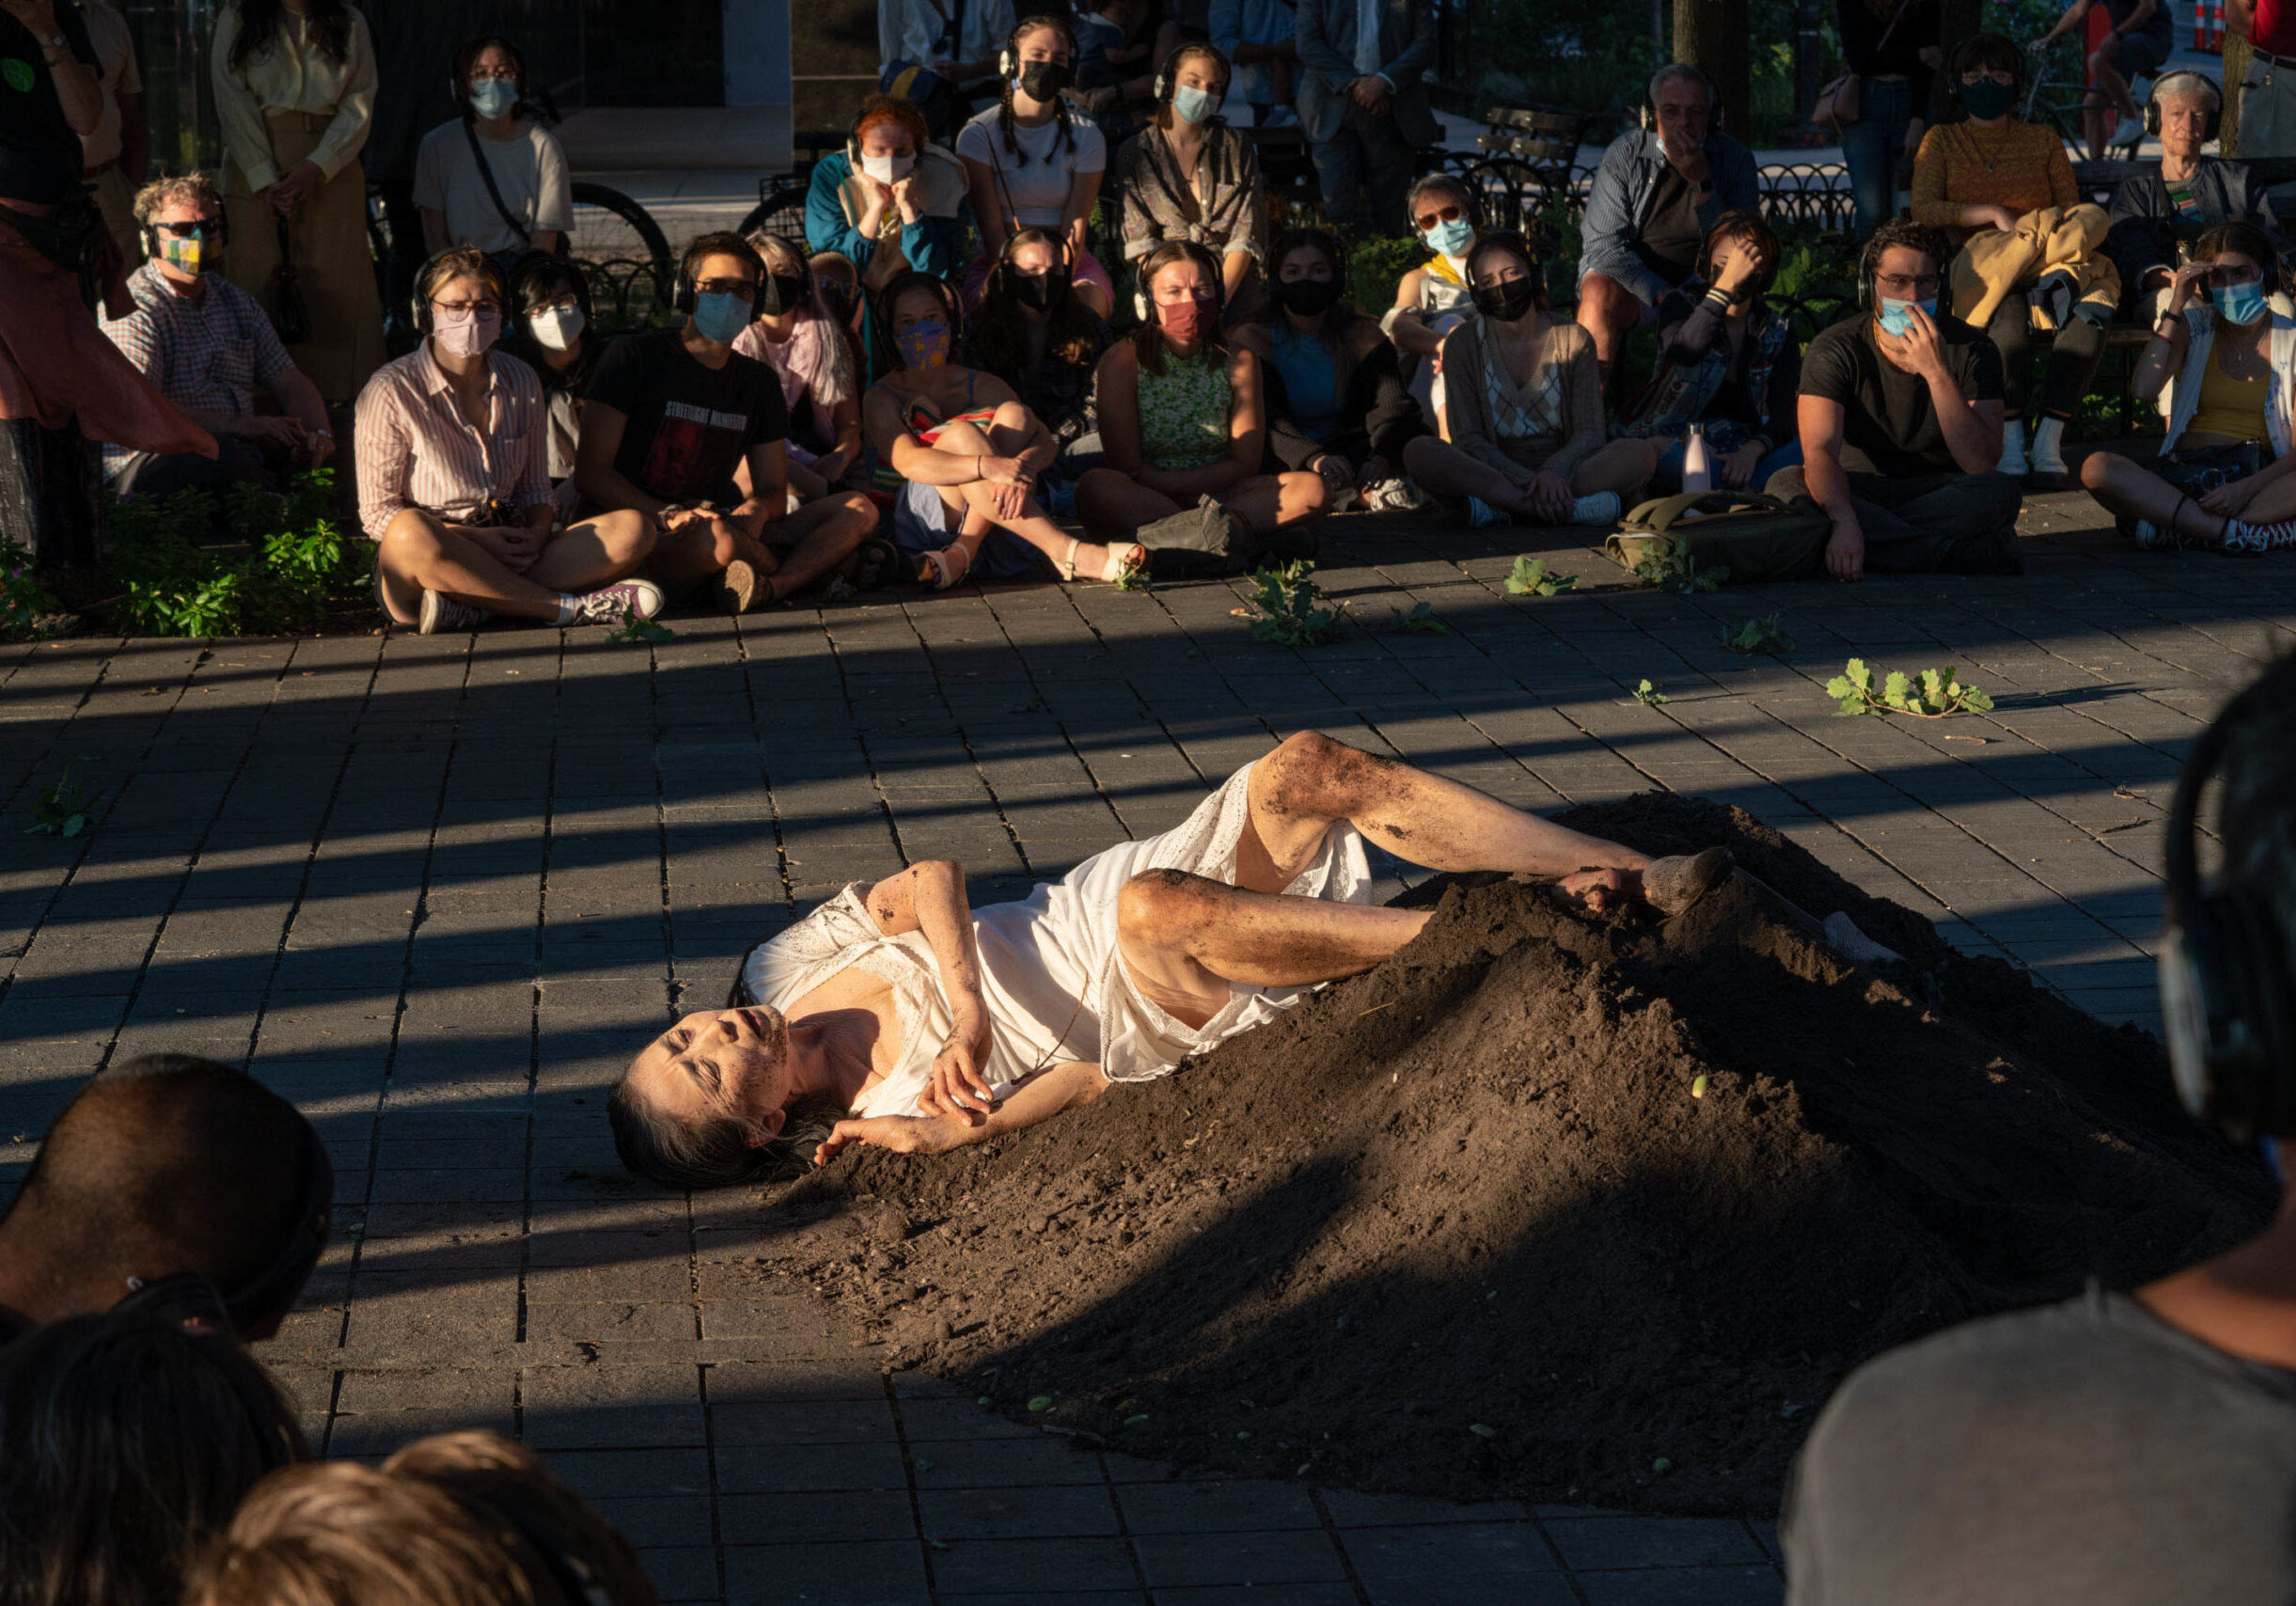 Eiko Otake: Slow Turn presented at Belvedere Plaza, Battery Park City in remembrance of 9/11. Photo by William Johnston